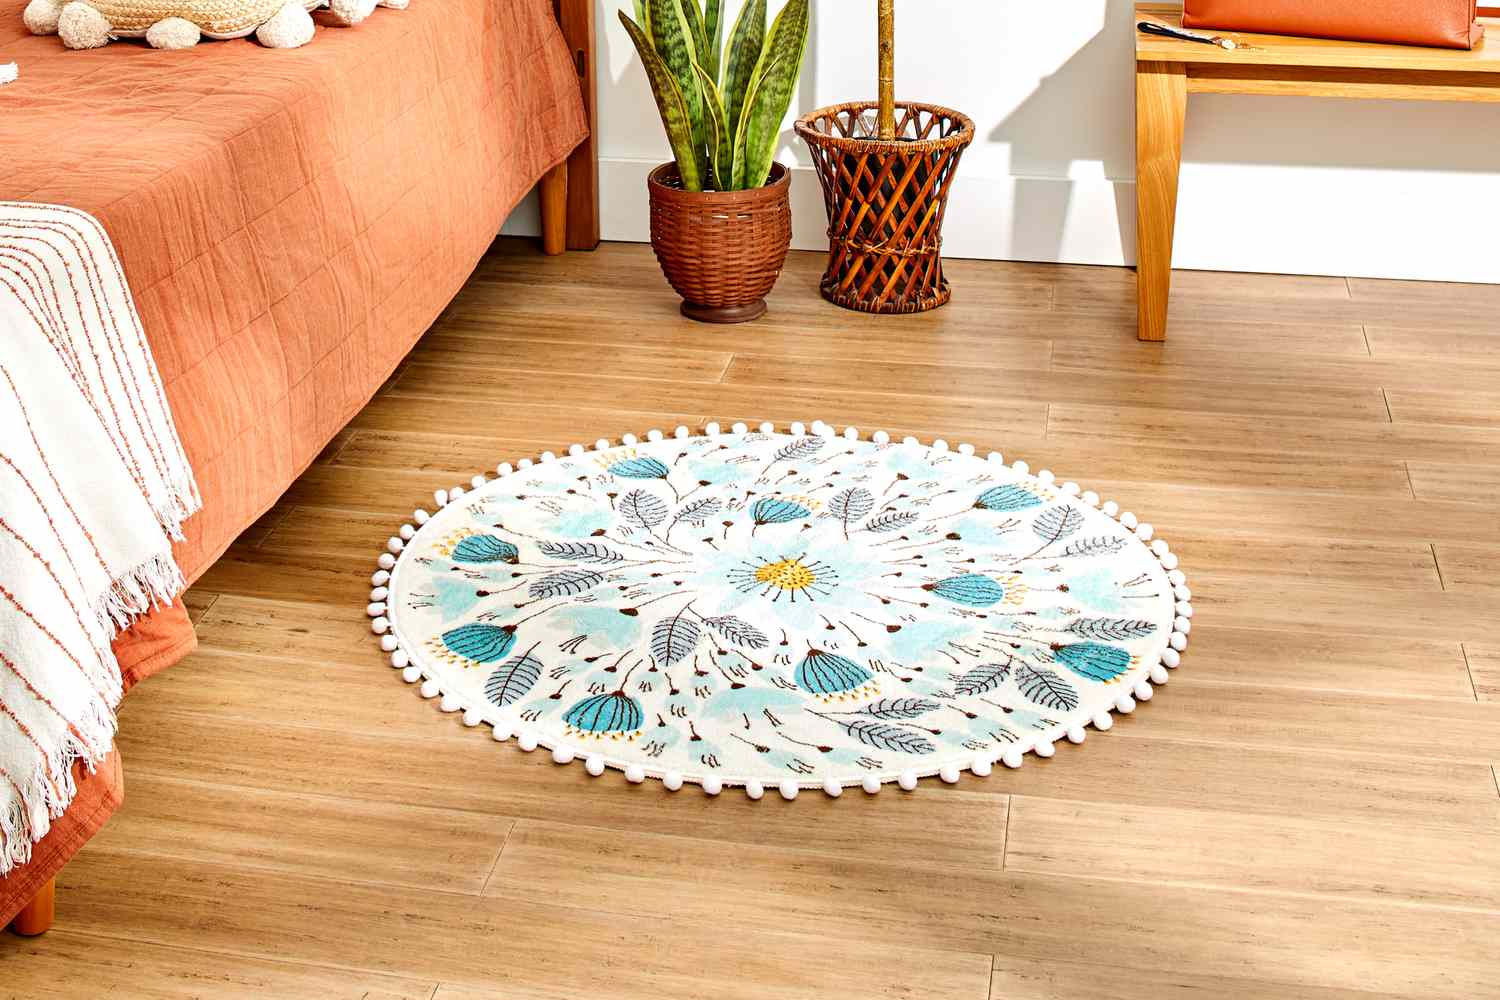 The Uphome Pom Pom Round Floral Rug in a bedroom setting